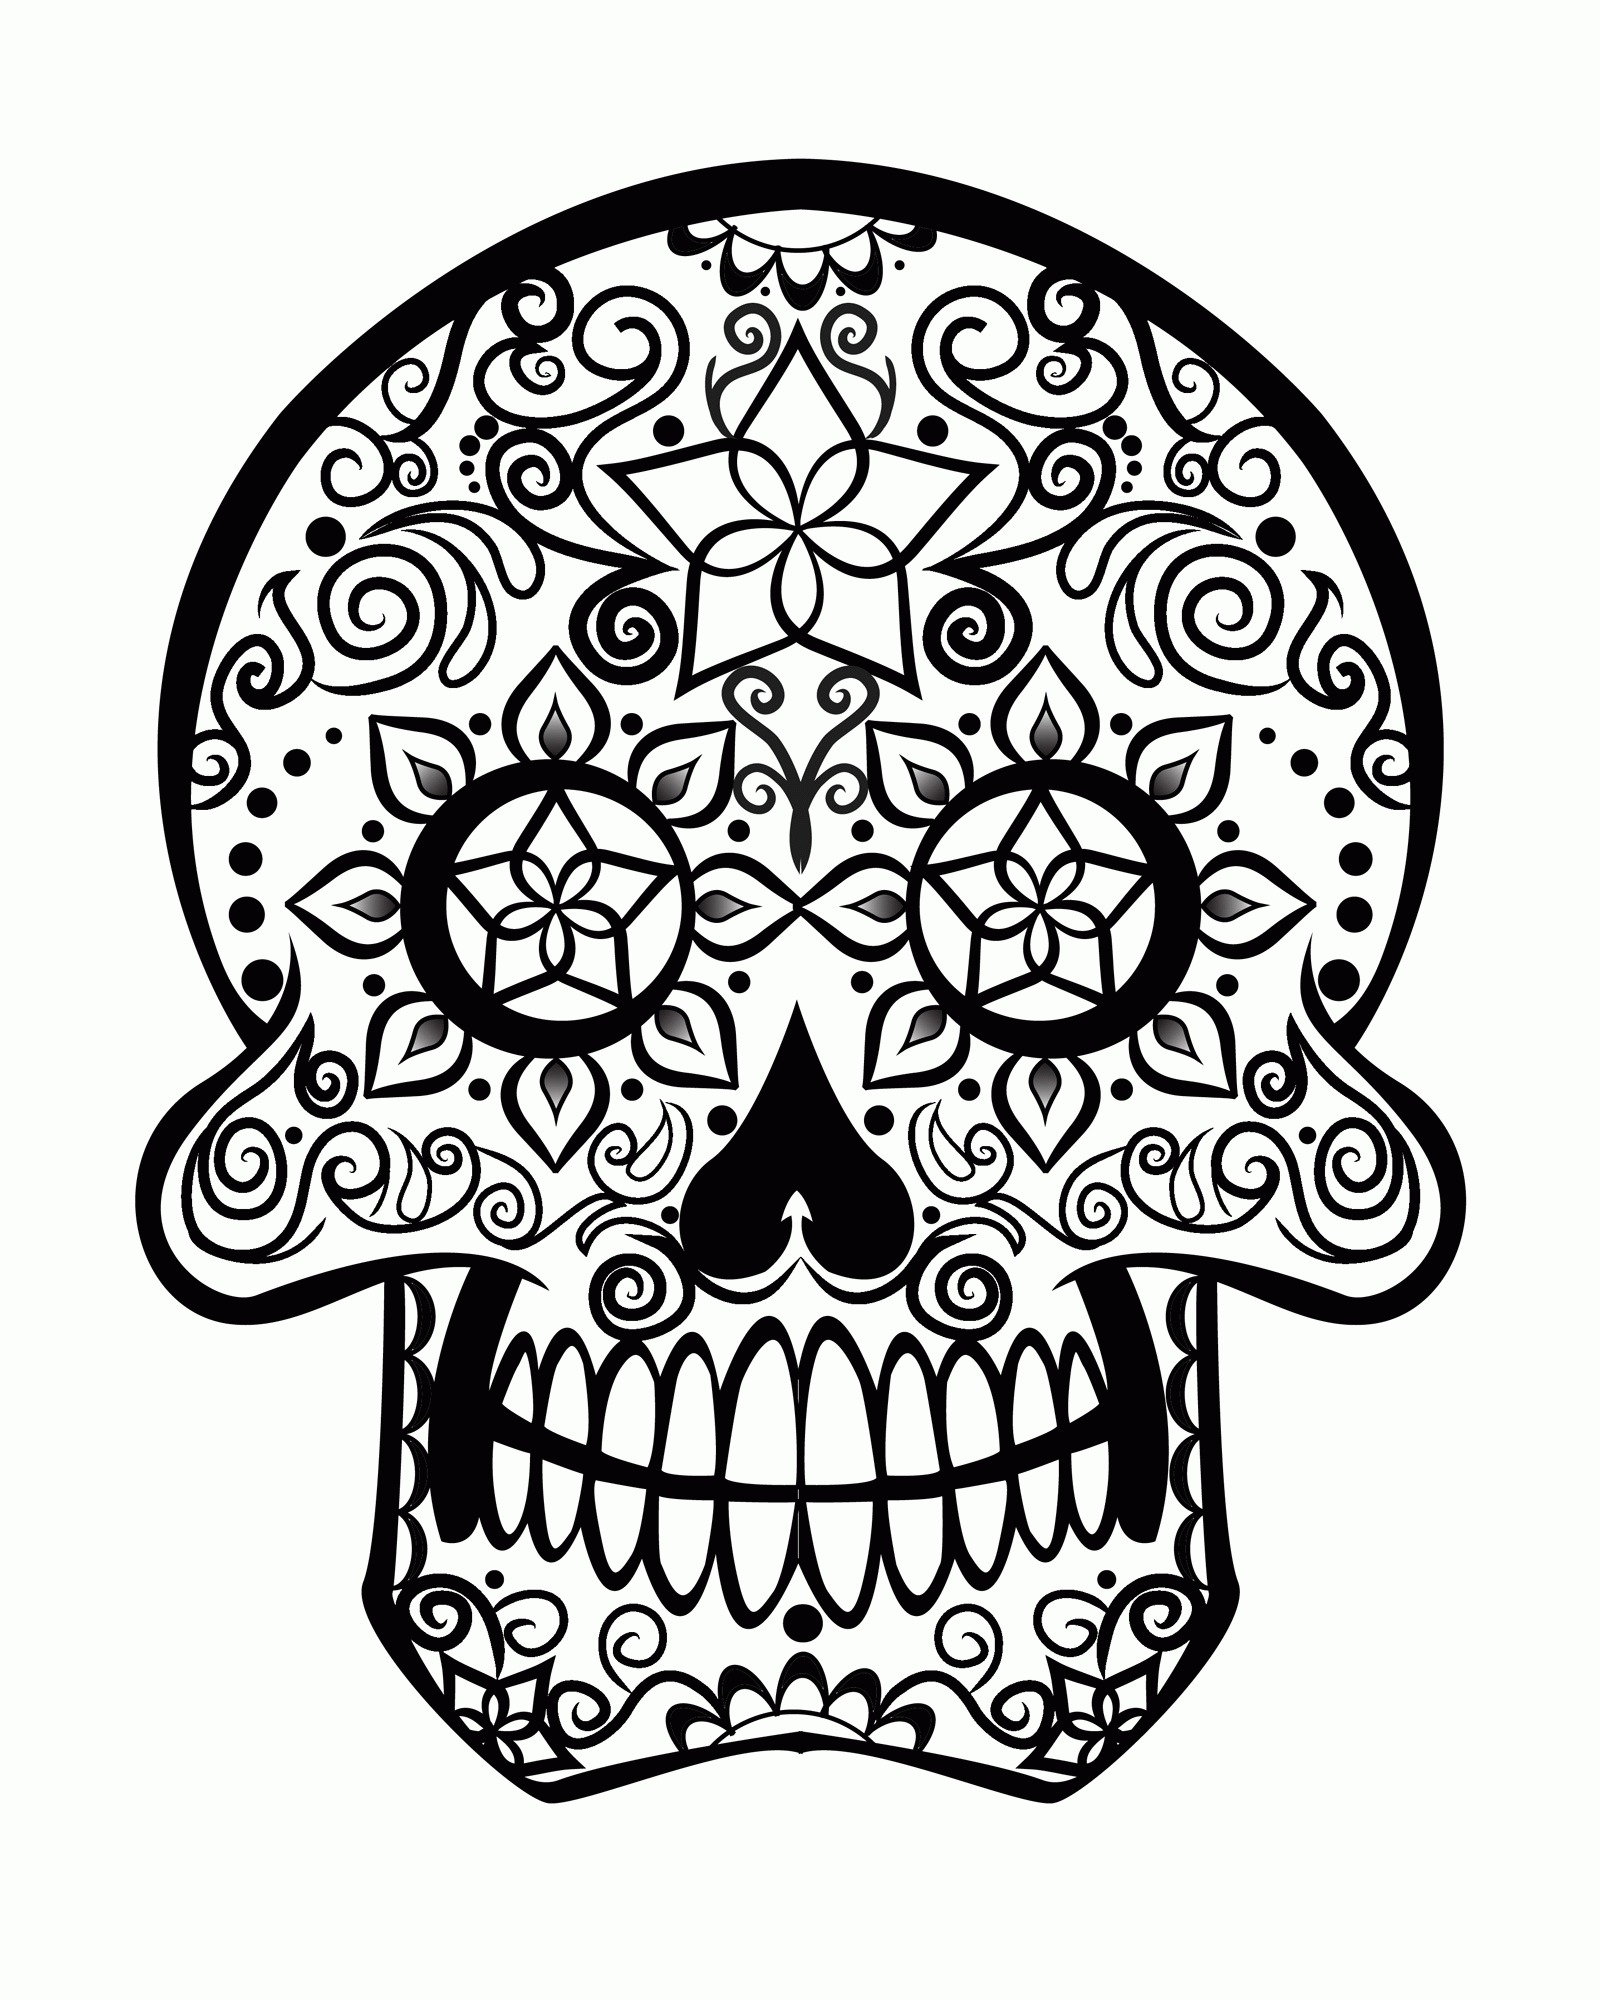 Anatomy Skull Coloring Pages To Print Skull Color Pages Free Sugar ...